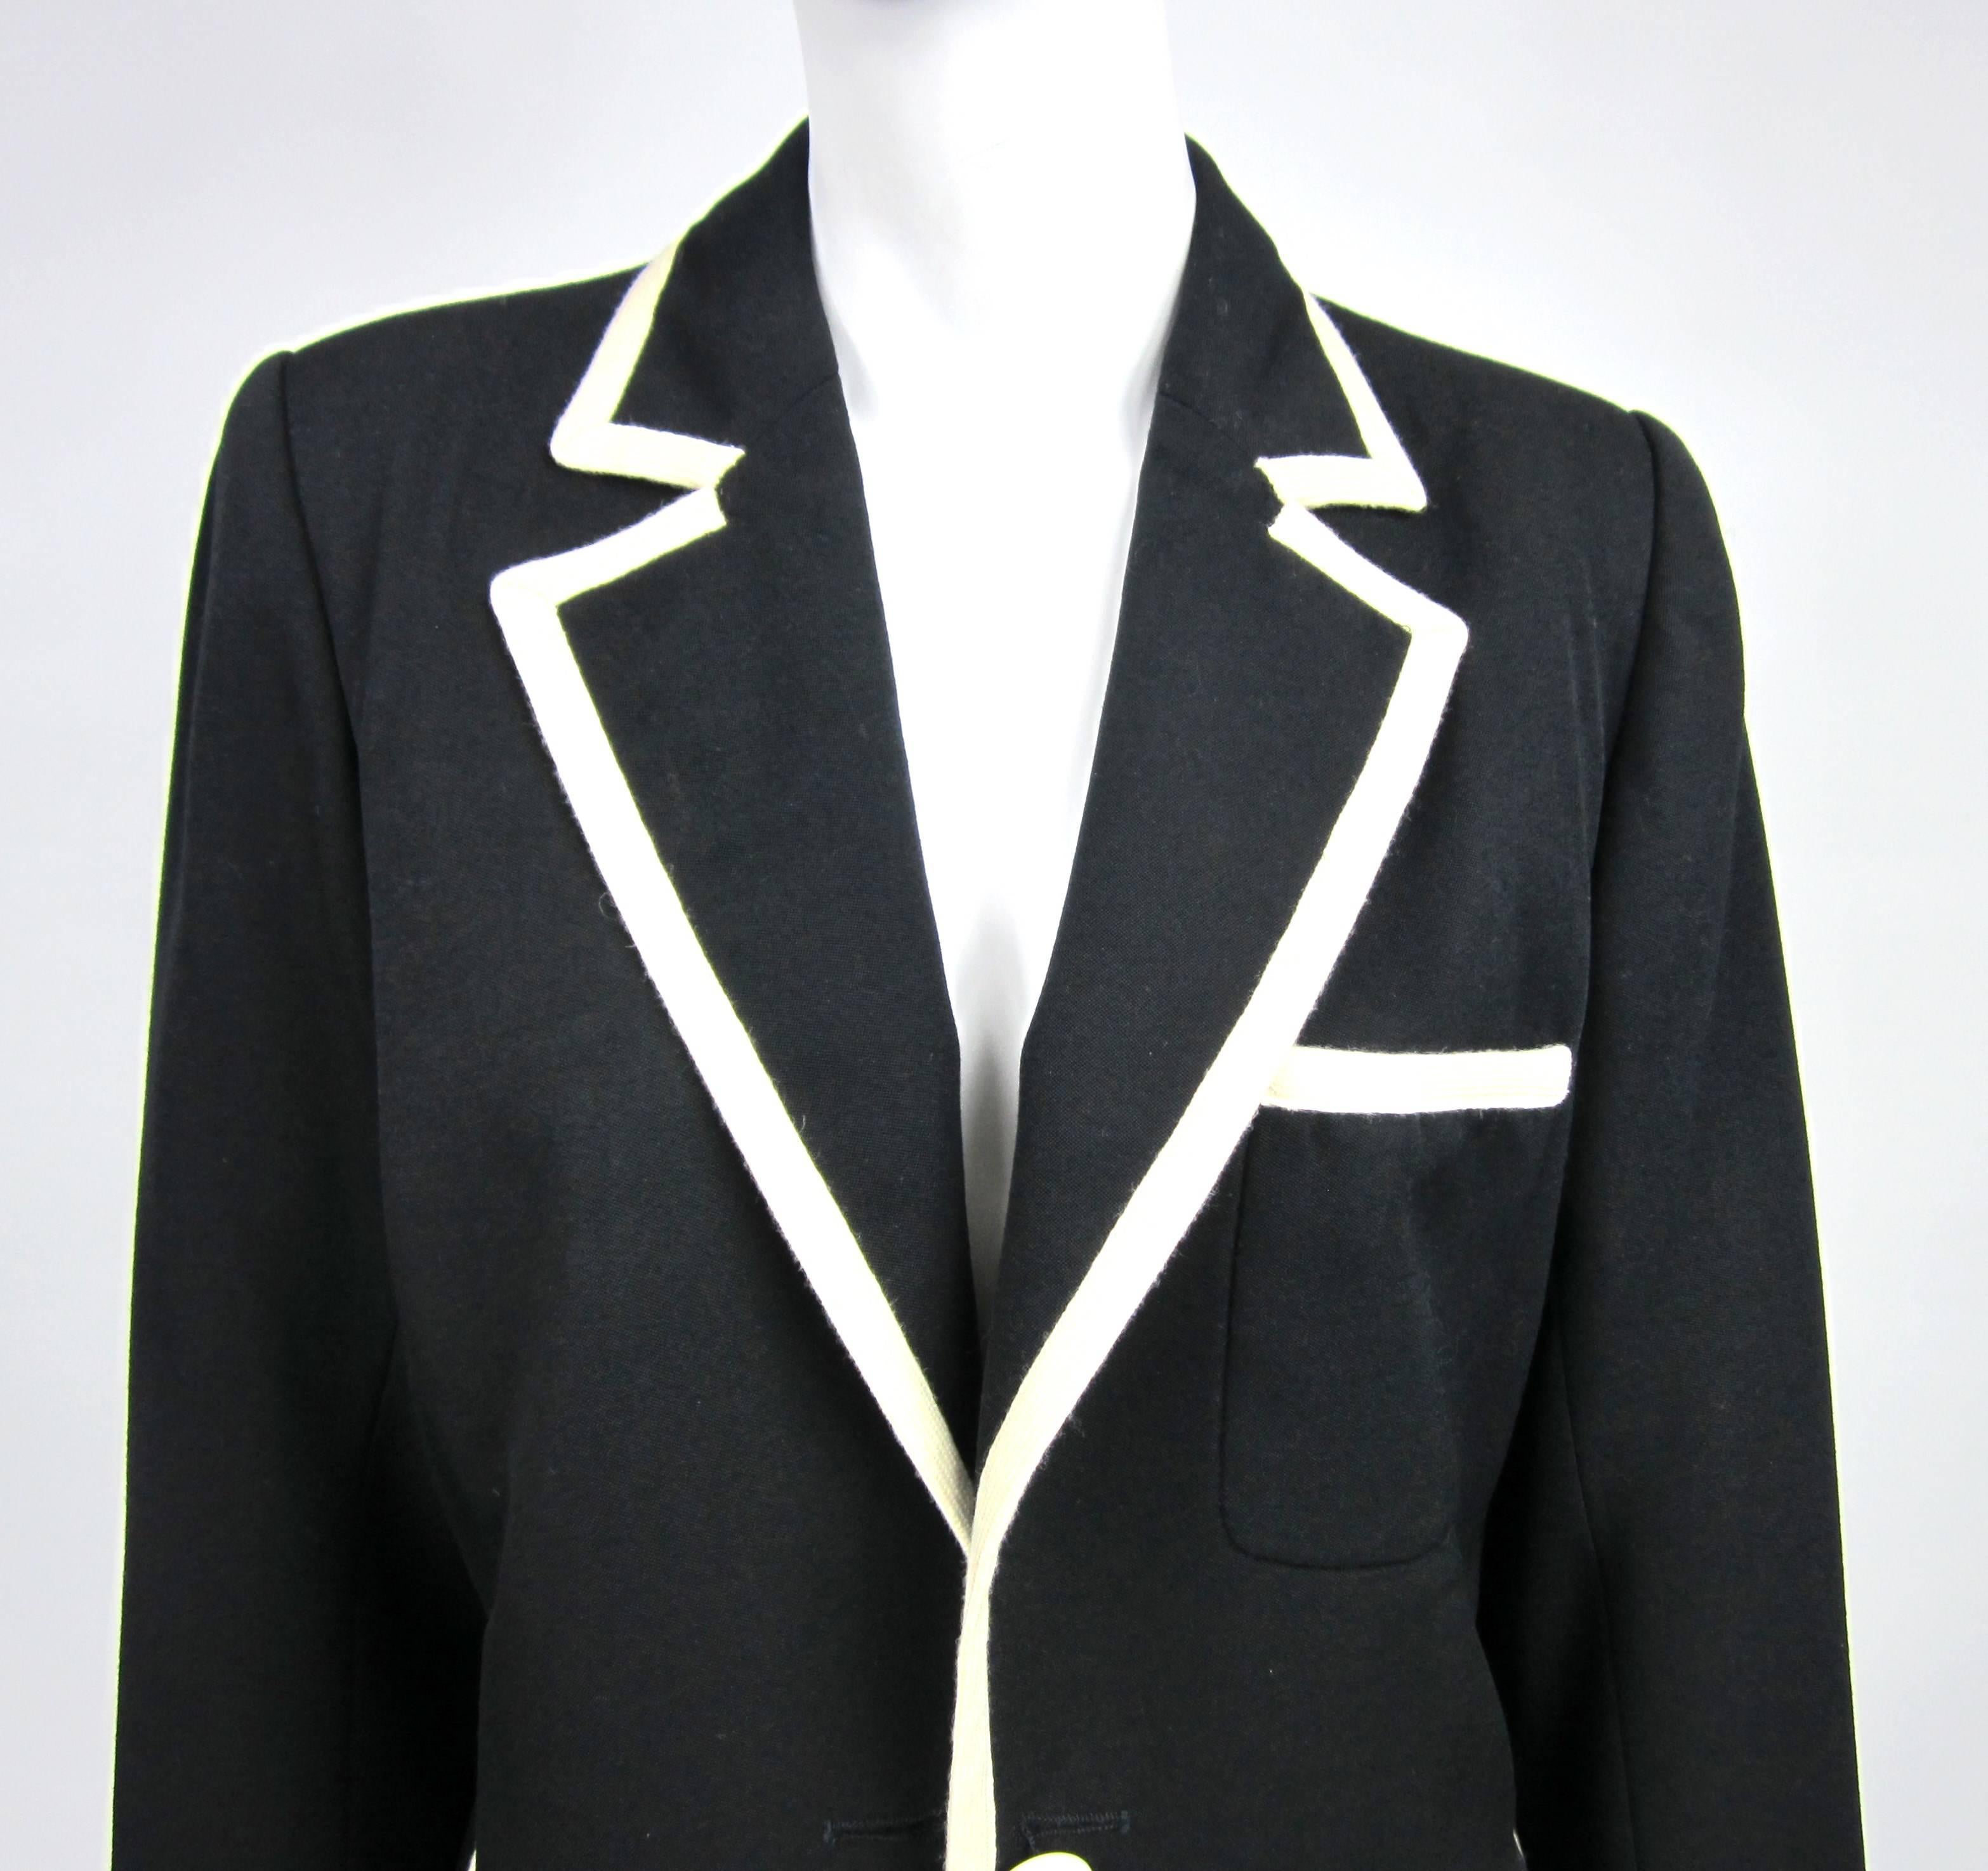 Clean lines on this Yves Saint Laurent Jacket. Classic look with the Black & white trim. Measuring. Up to 40in on the bust. Up to 36in on the waist. Sleeve 22.5in  -- 21.5 in. Long.  Listing it as good condition, but it is better than good. Have to